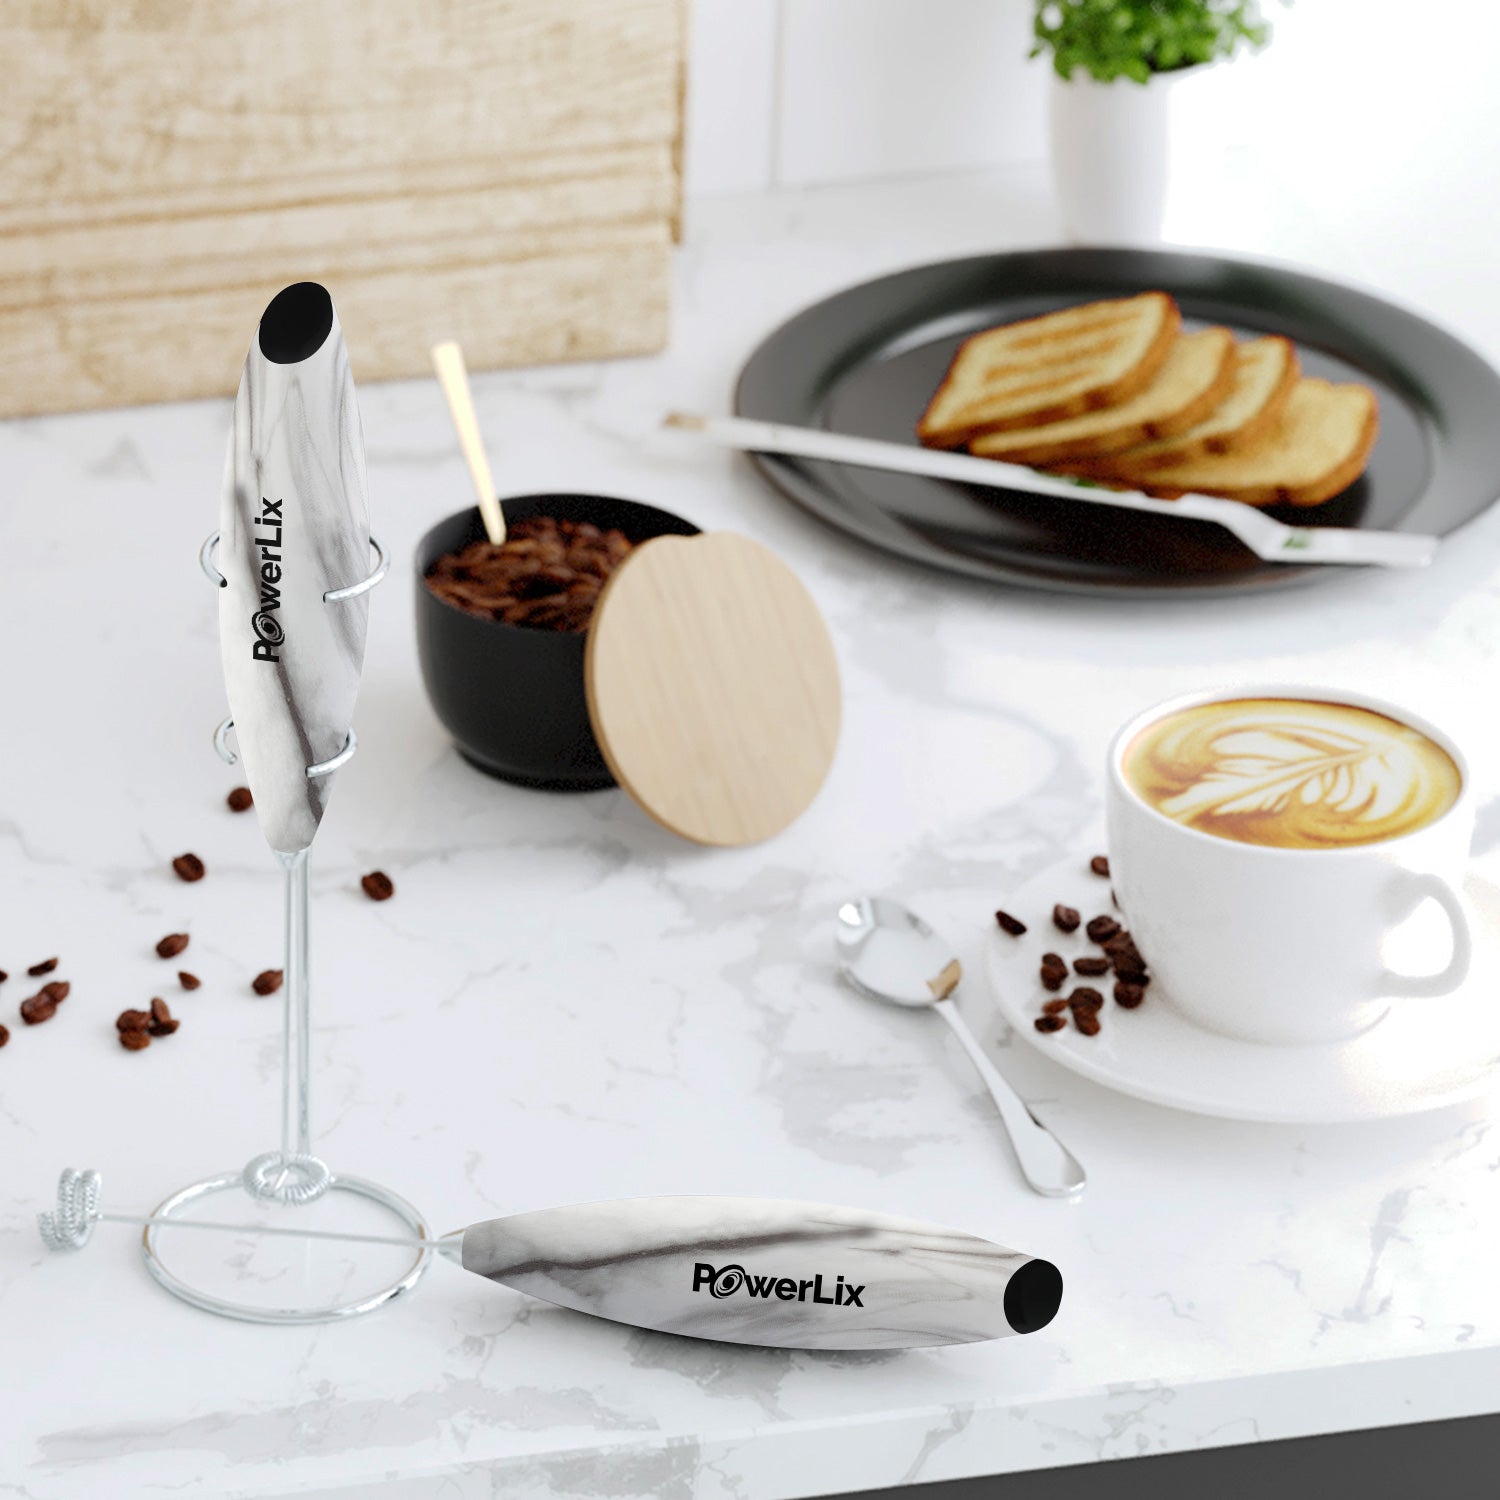 Powerlix milk frother in marble on its stand with another on its side on a counter. Ther is a coffee cup behind it with a plate of toast and a container with coffee beans.